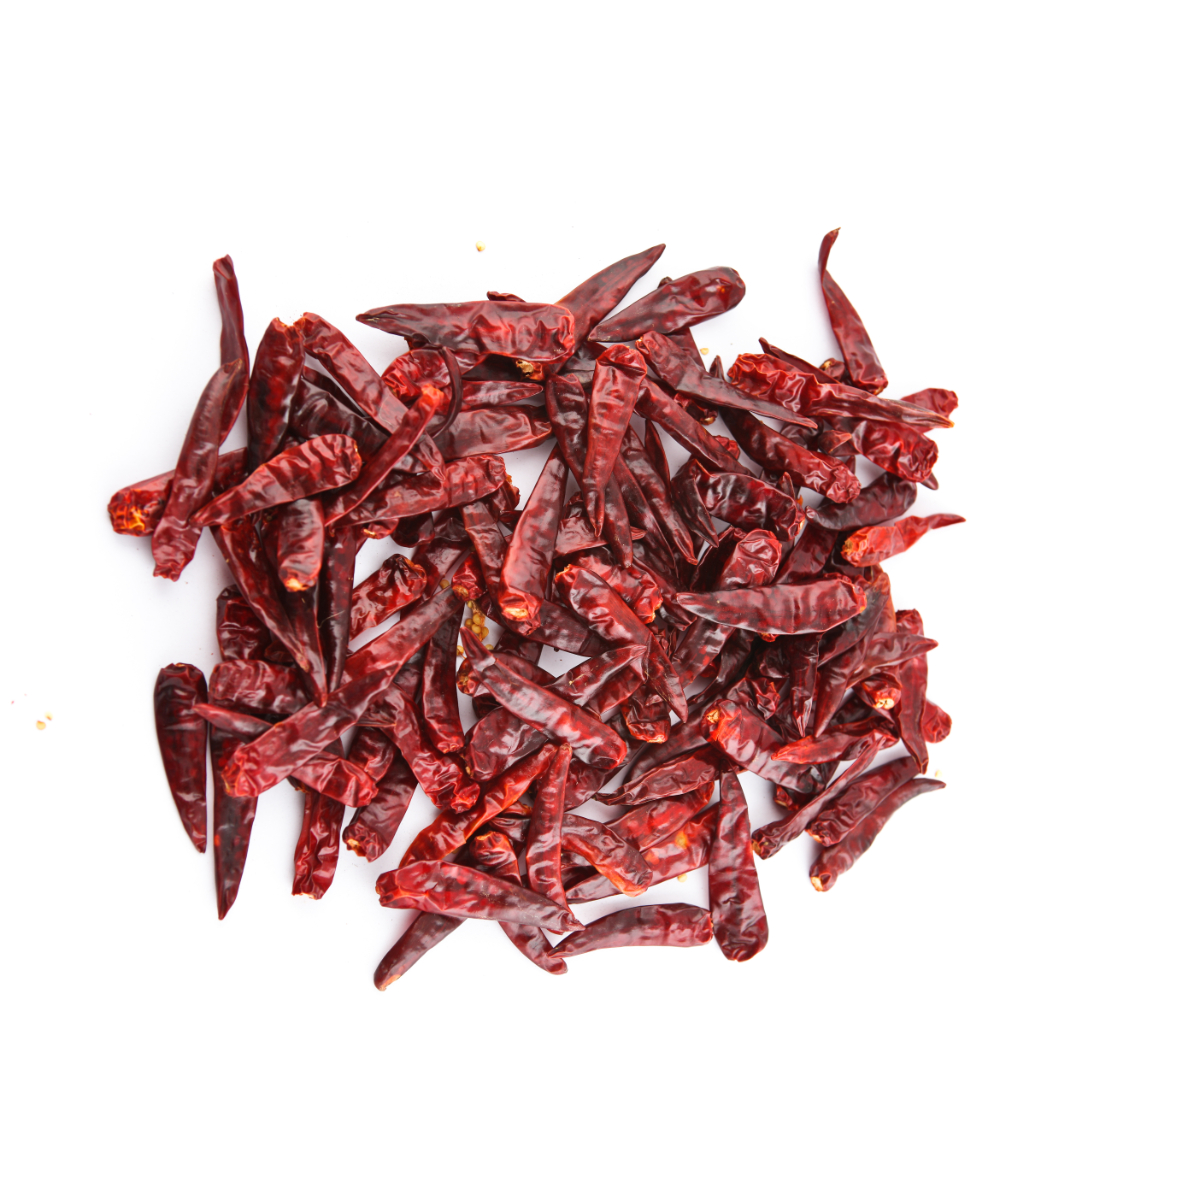 Wholesale Spicy Dry Red Chilli S4 Sannam Chilly With Stem Without Stem carton box packing